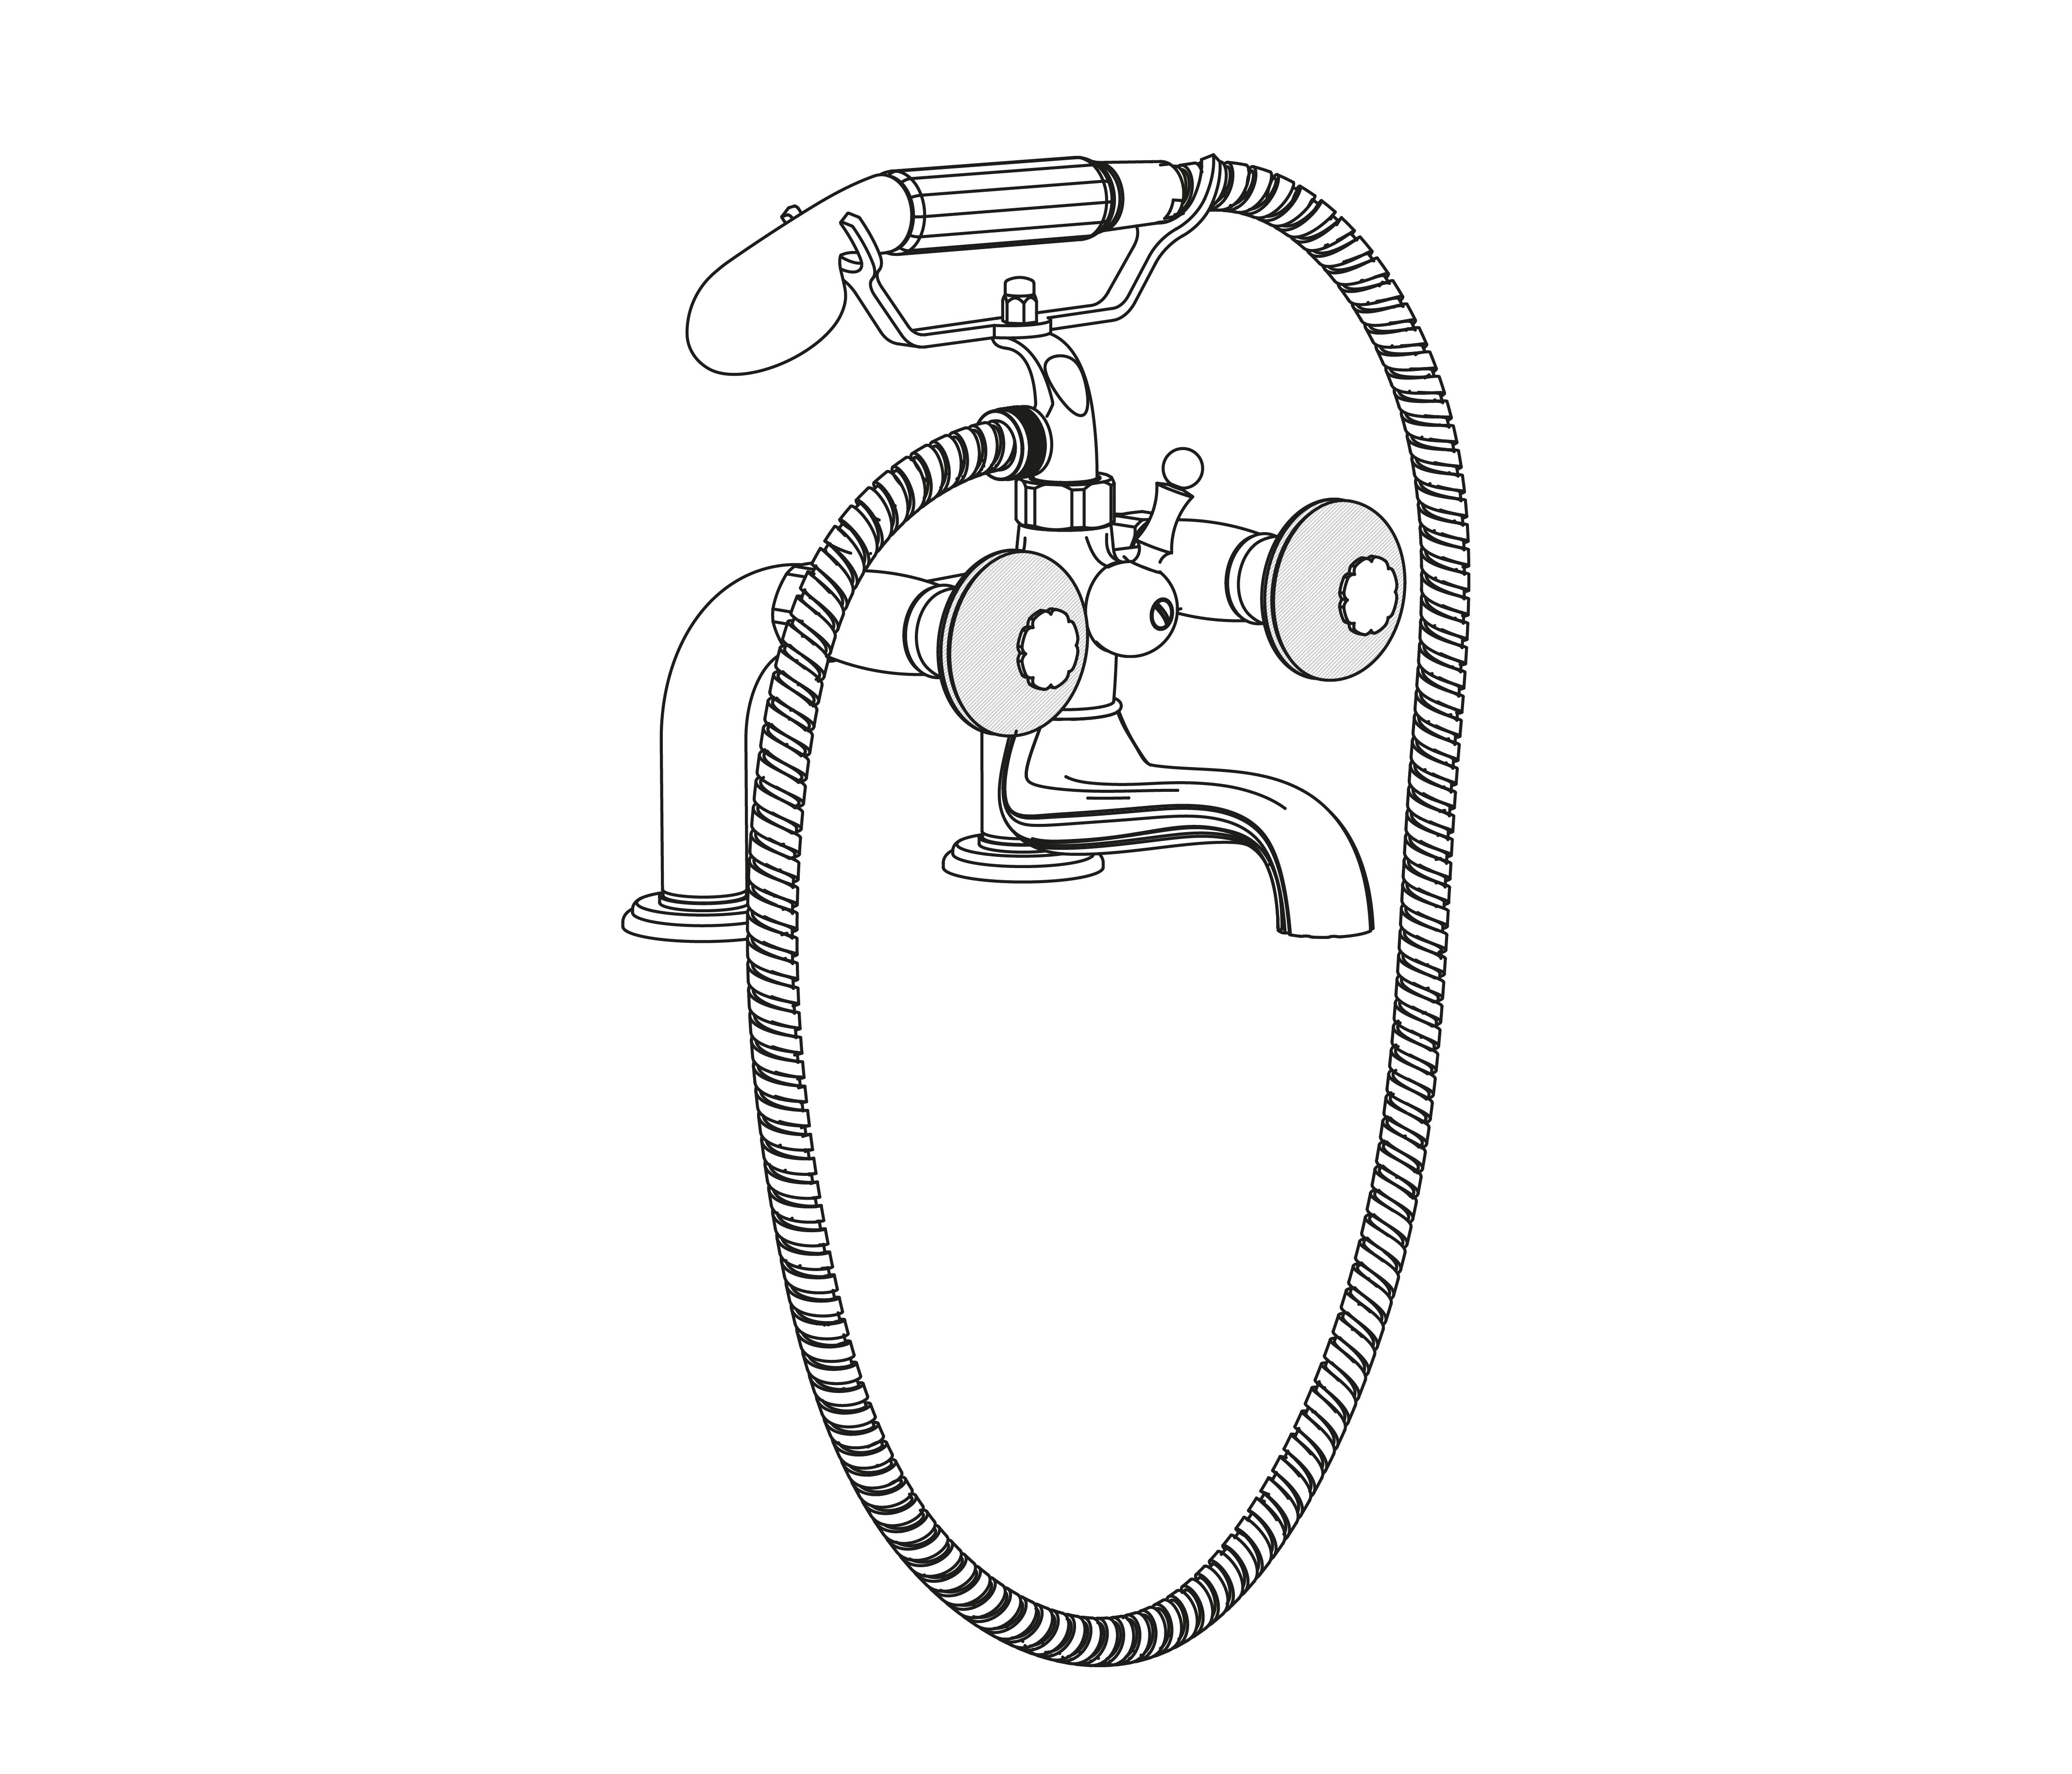 C50-3306 Rim mounted bath and shower mixer